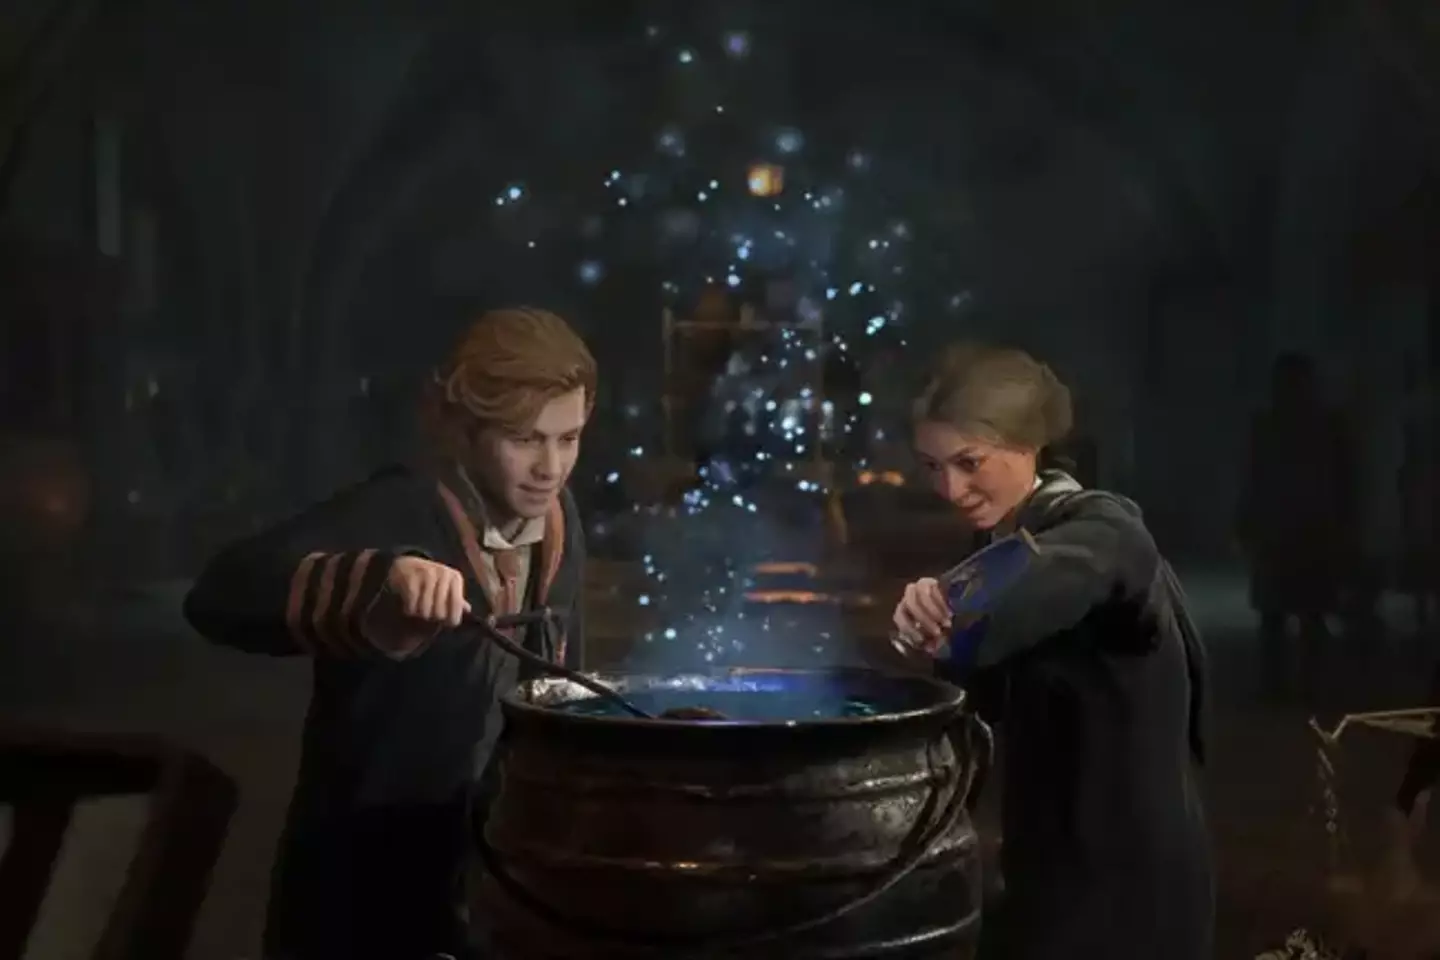 Hogwarts Legacy players want to know if they can become an animagus or not.